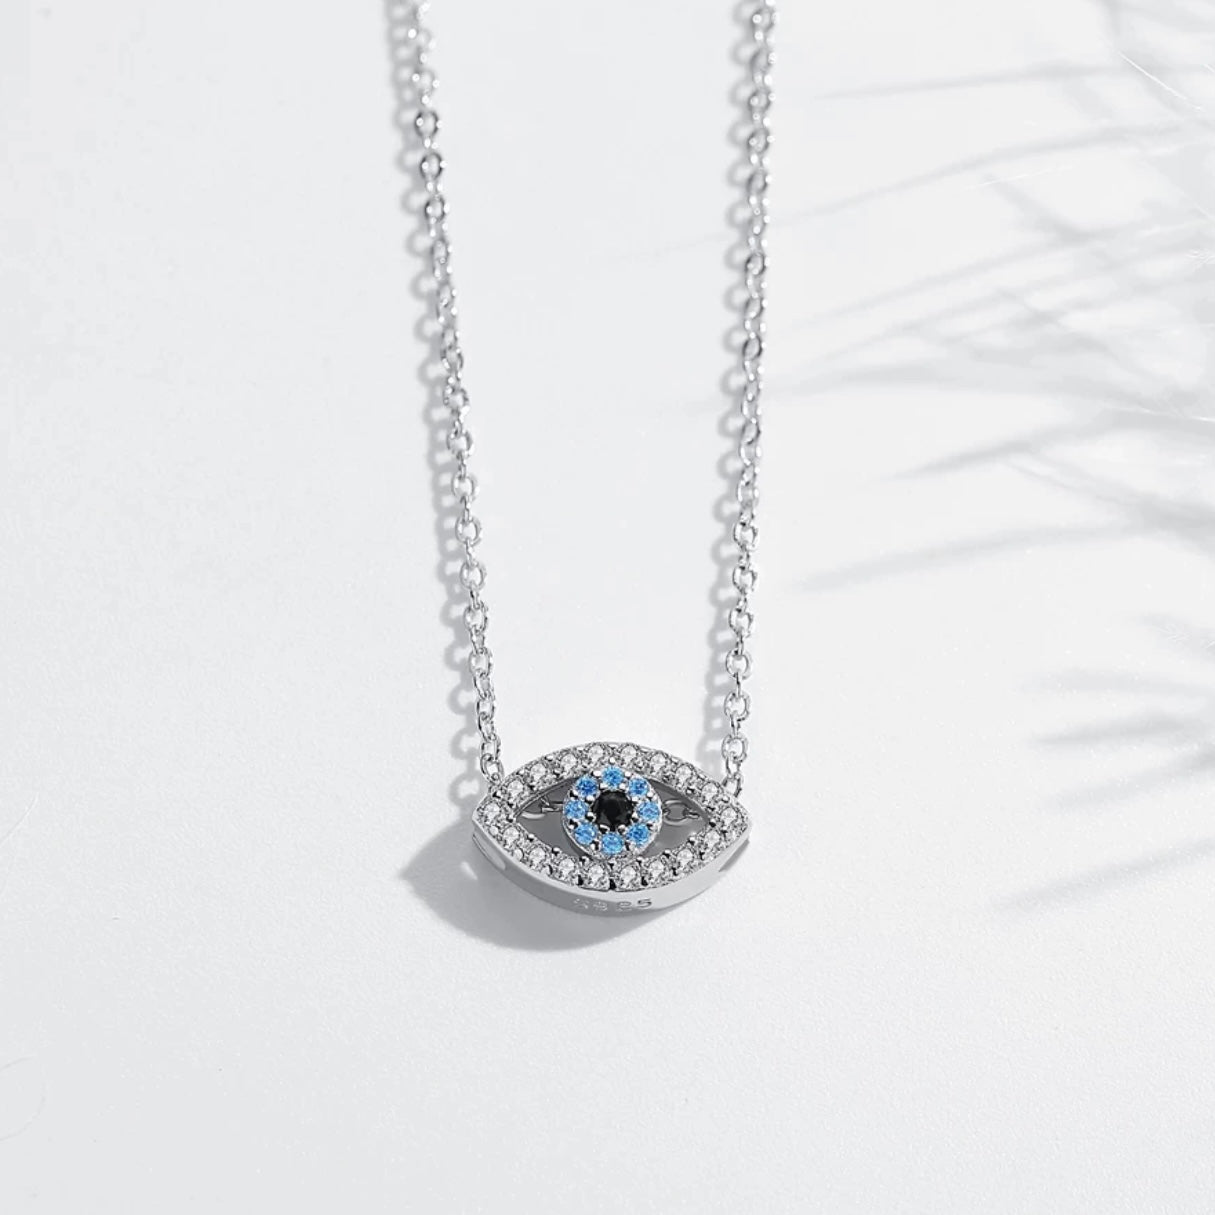 CAPRIA STERLING SILVER WITH CZ STONES EVIL EYE NECKLACE